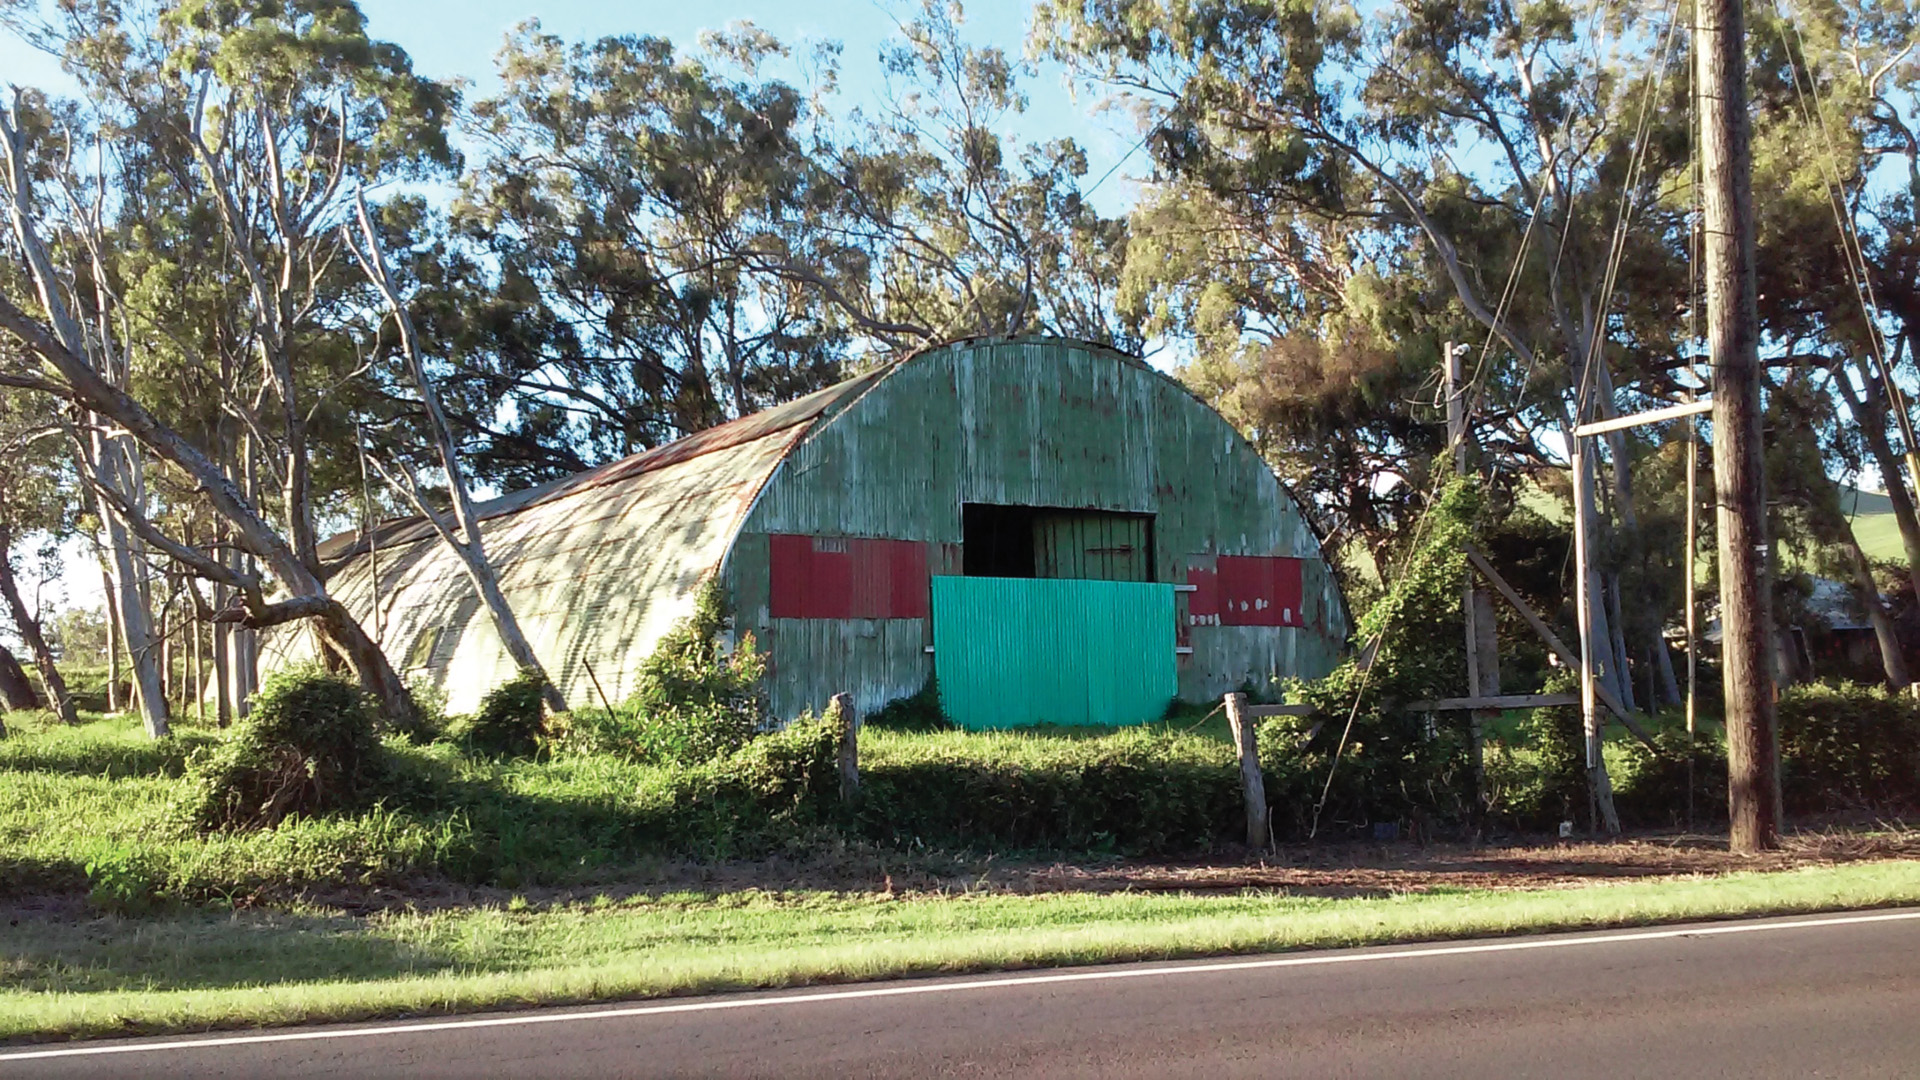 A derelict, rusting Quonset hut is all that remains of the sprawling Camp Tarawa on the Big Island of Hawaii.